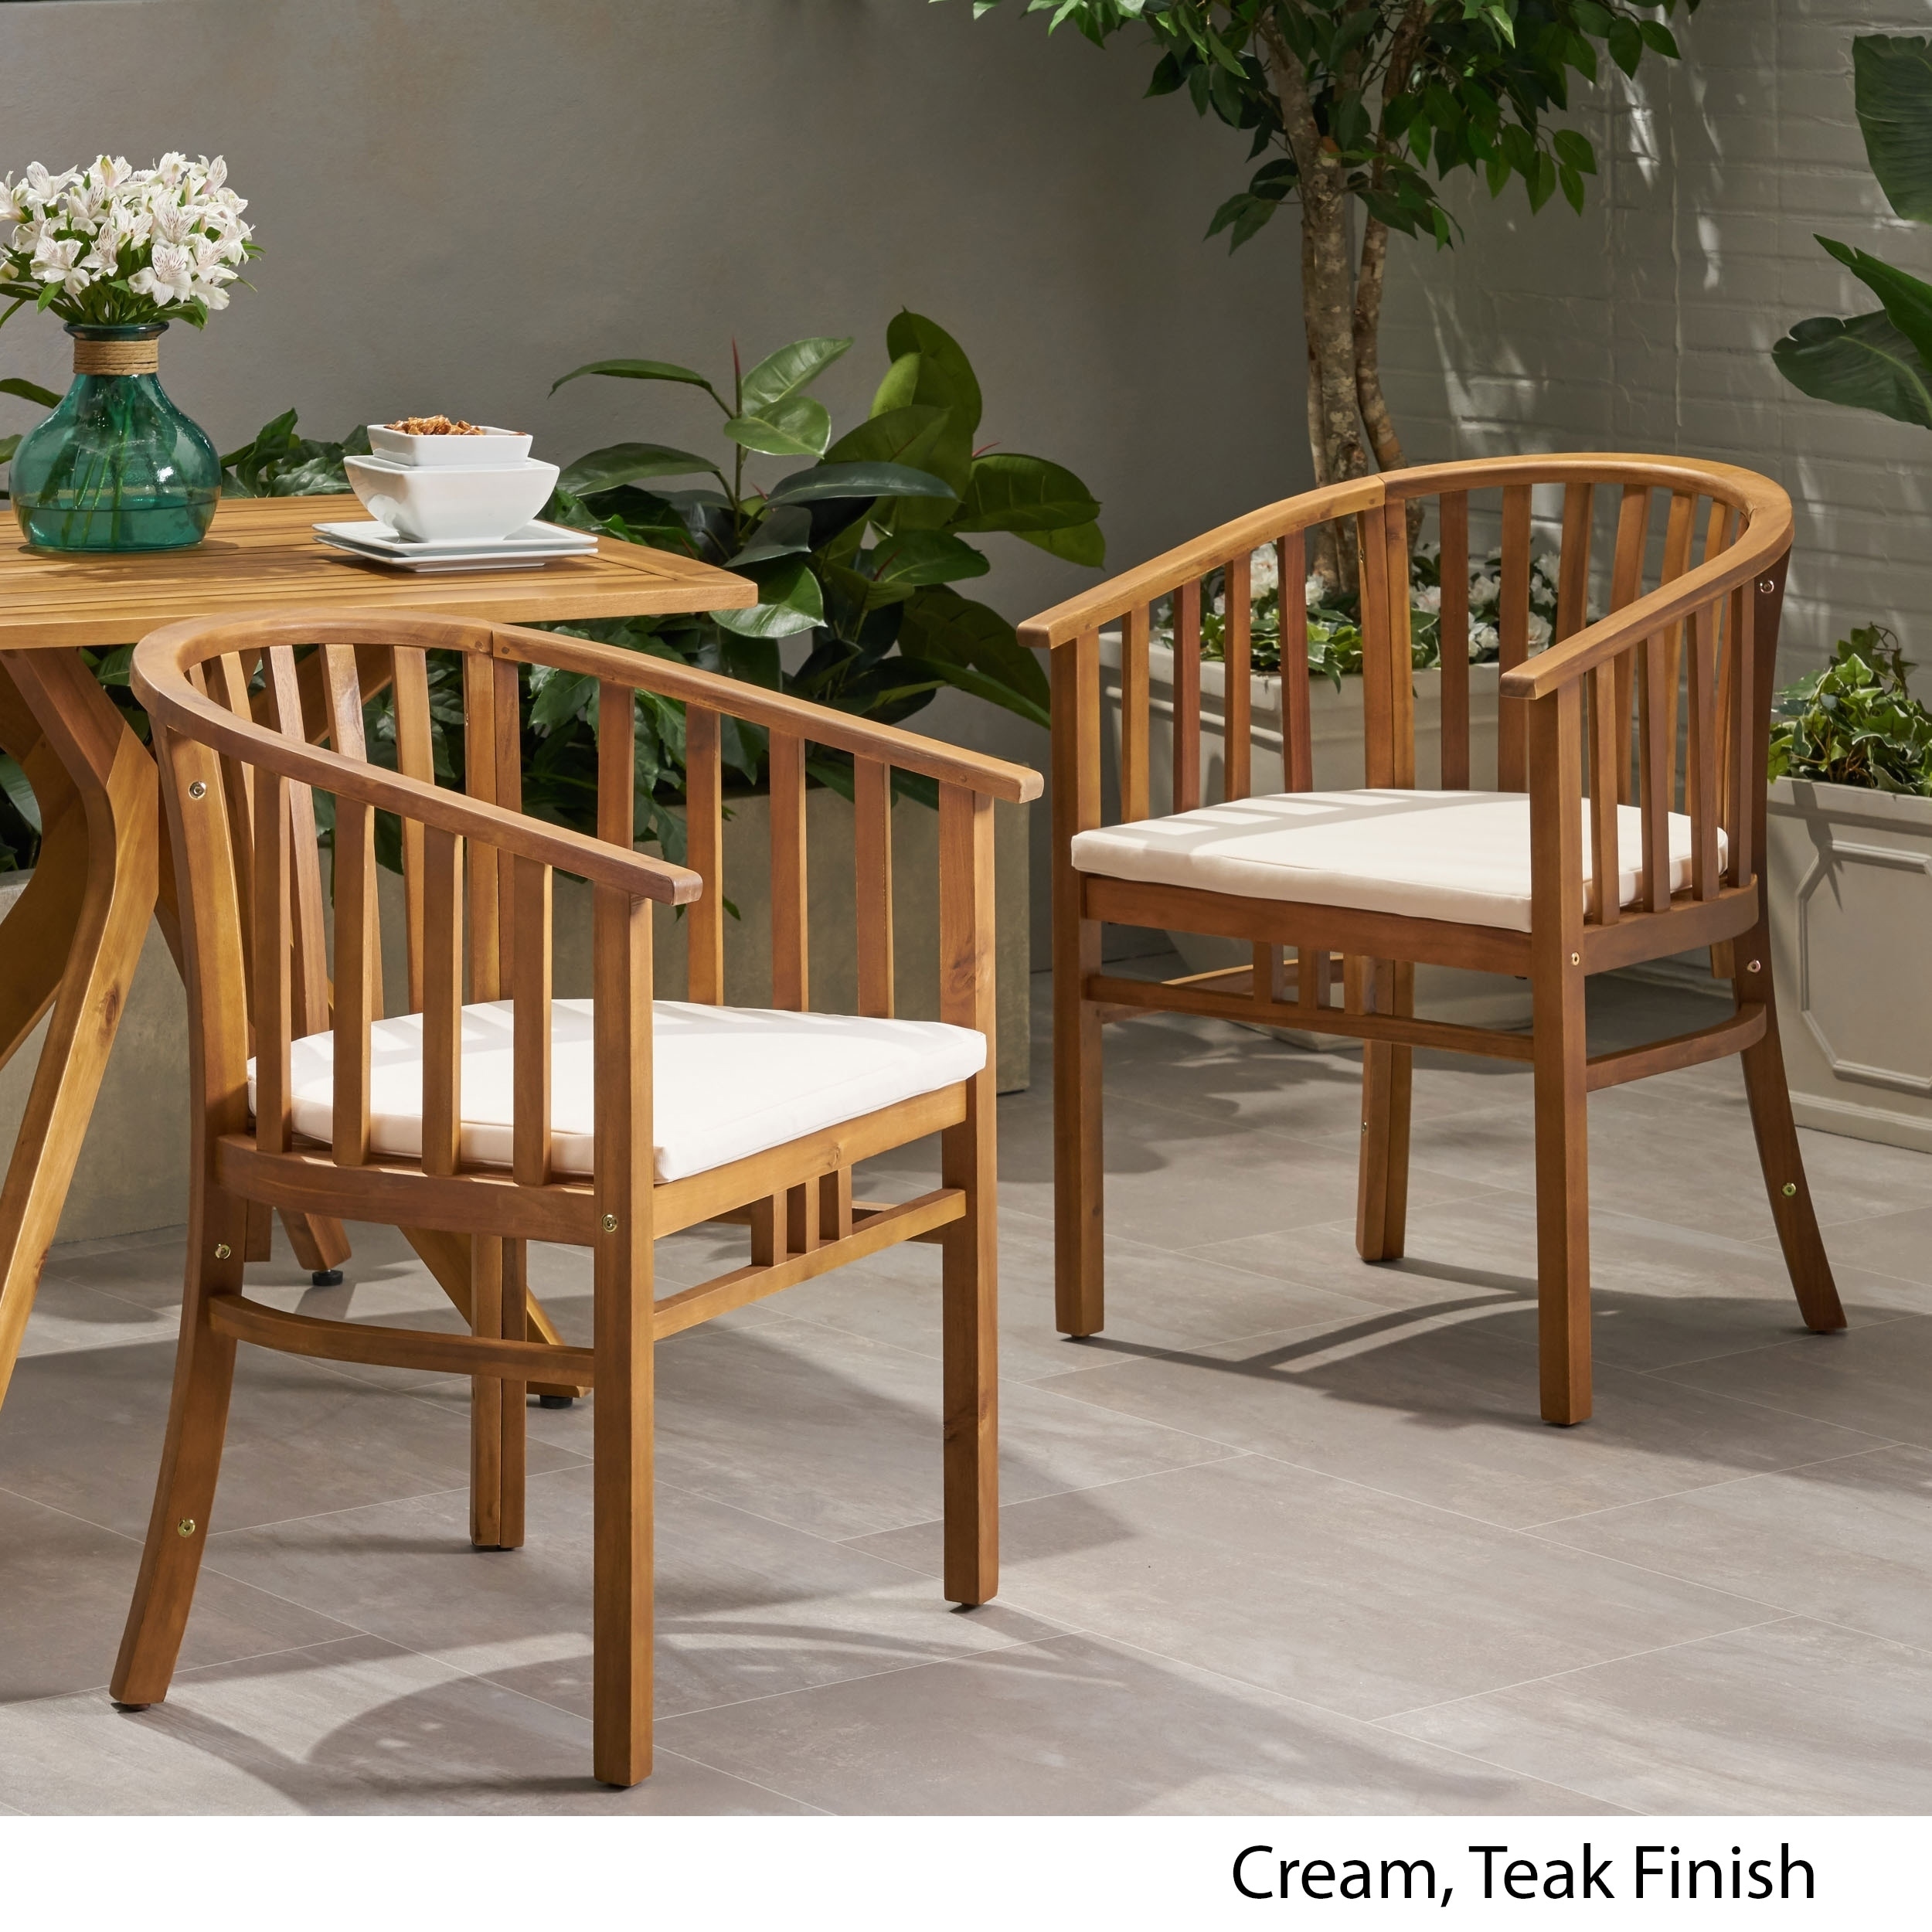 Alondra Outdoor Wooden Dining Chairs With Cushions Set Of 2 By Christopher Knight Home N A On Sale Overstock 27569235